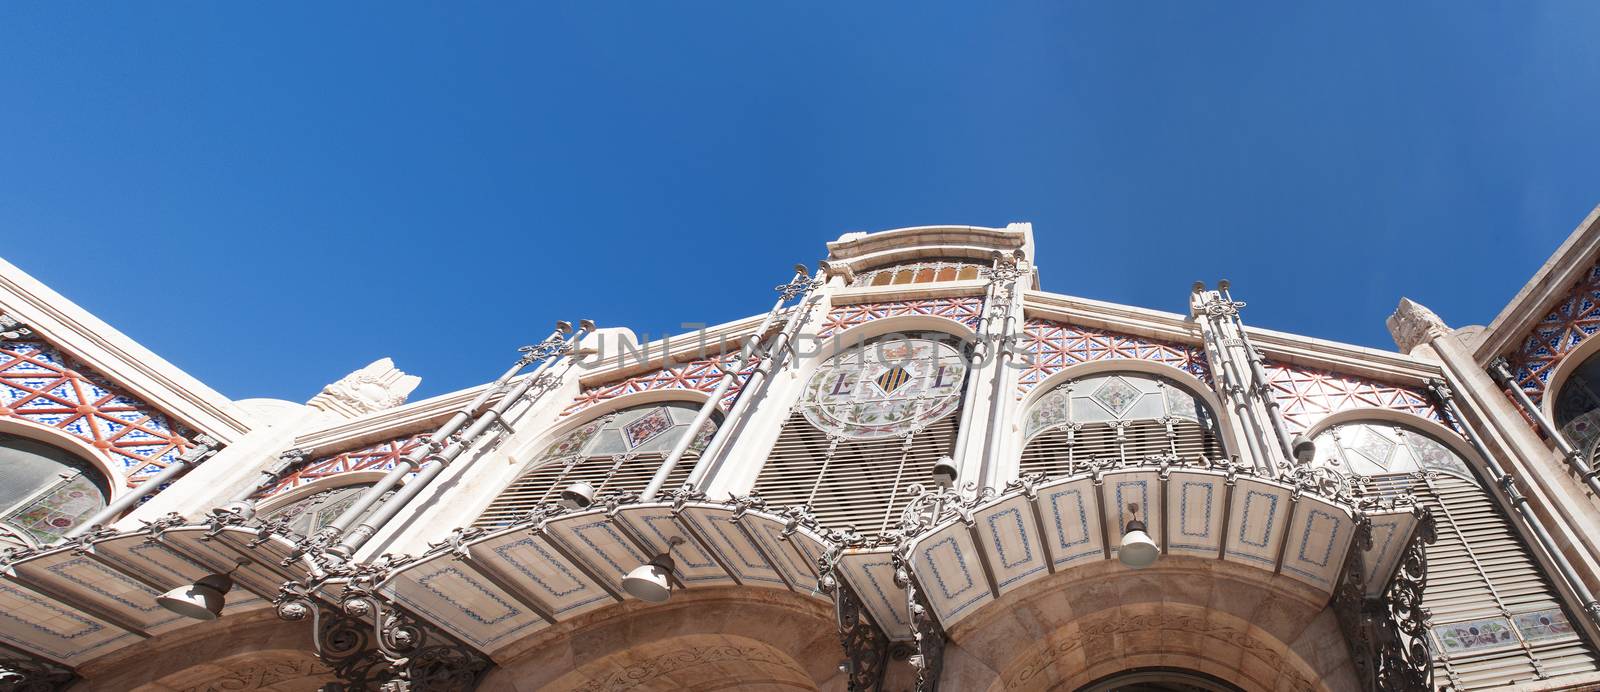 bottom view of the famous traditional central market of Valencia by rarrarorro